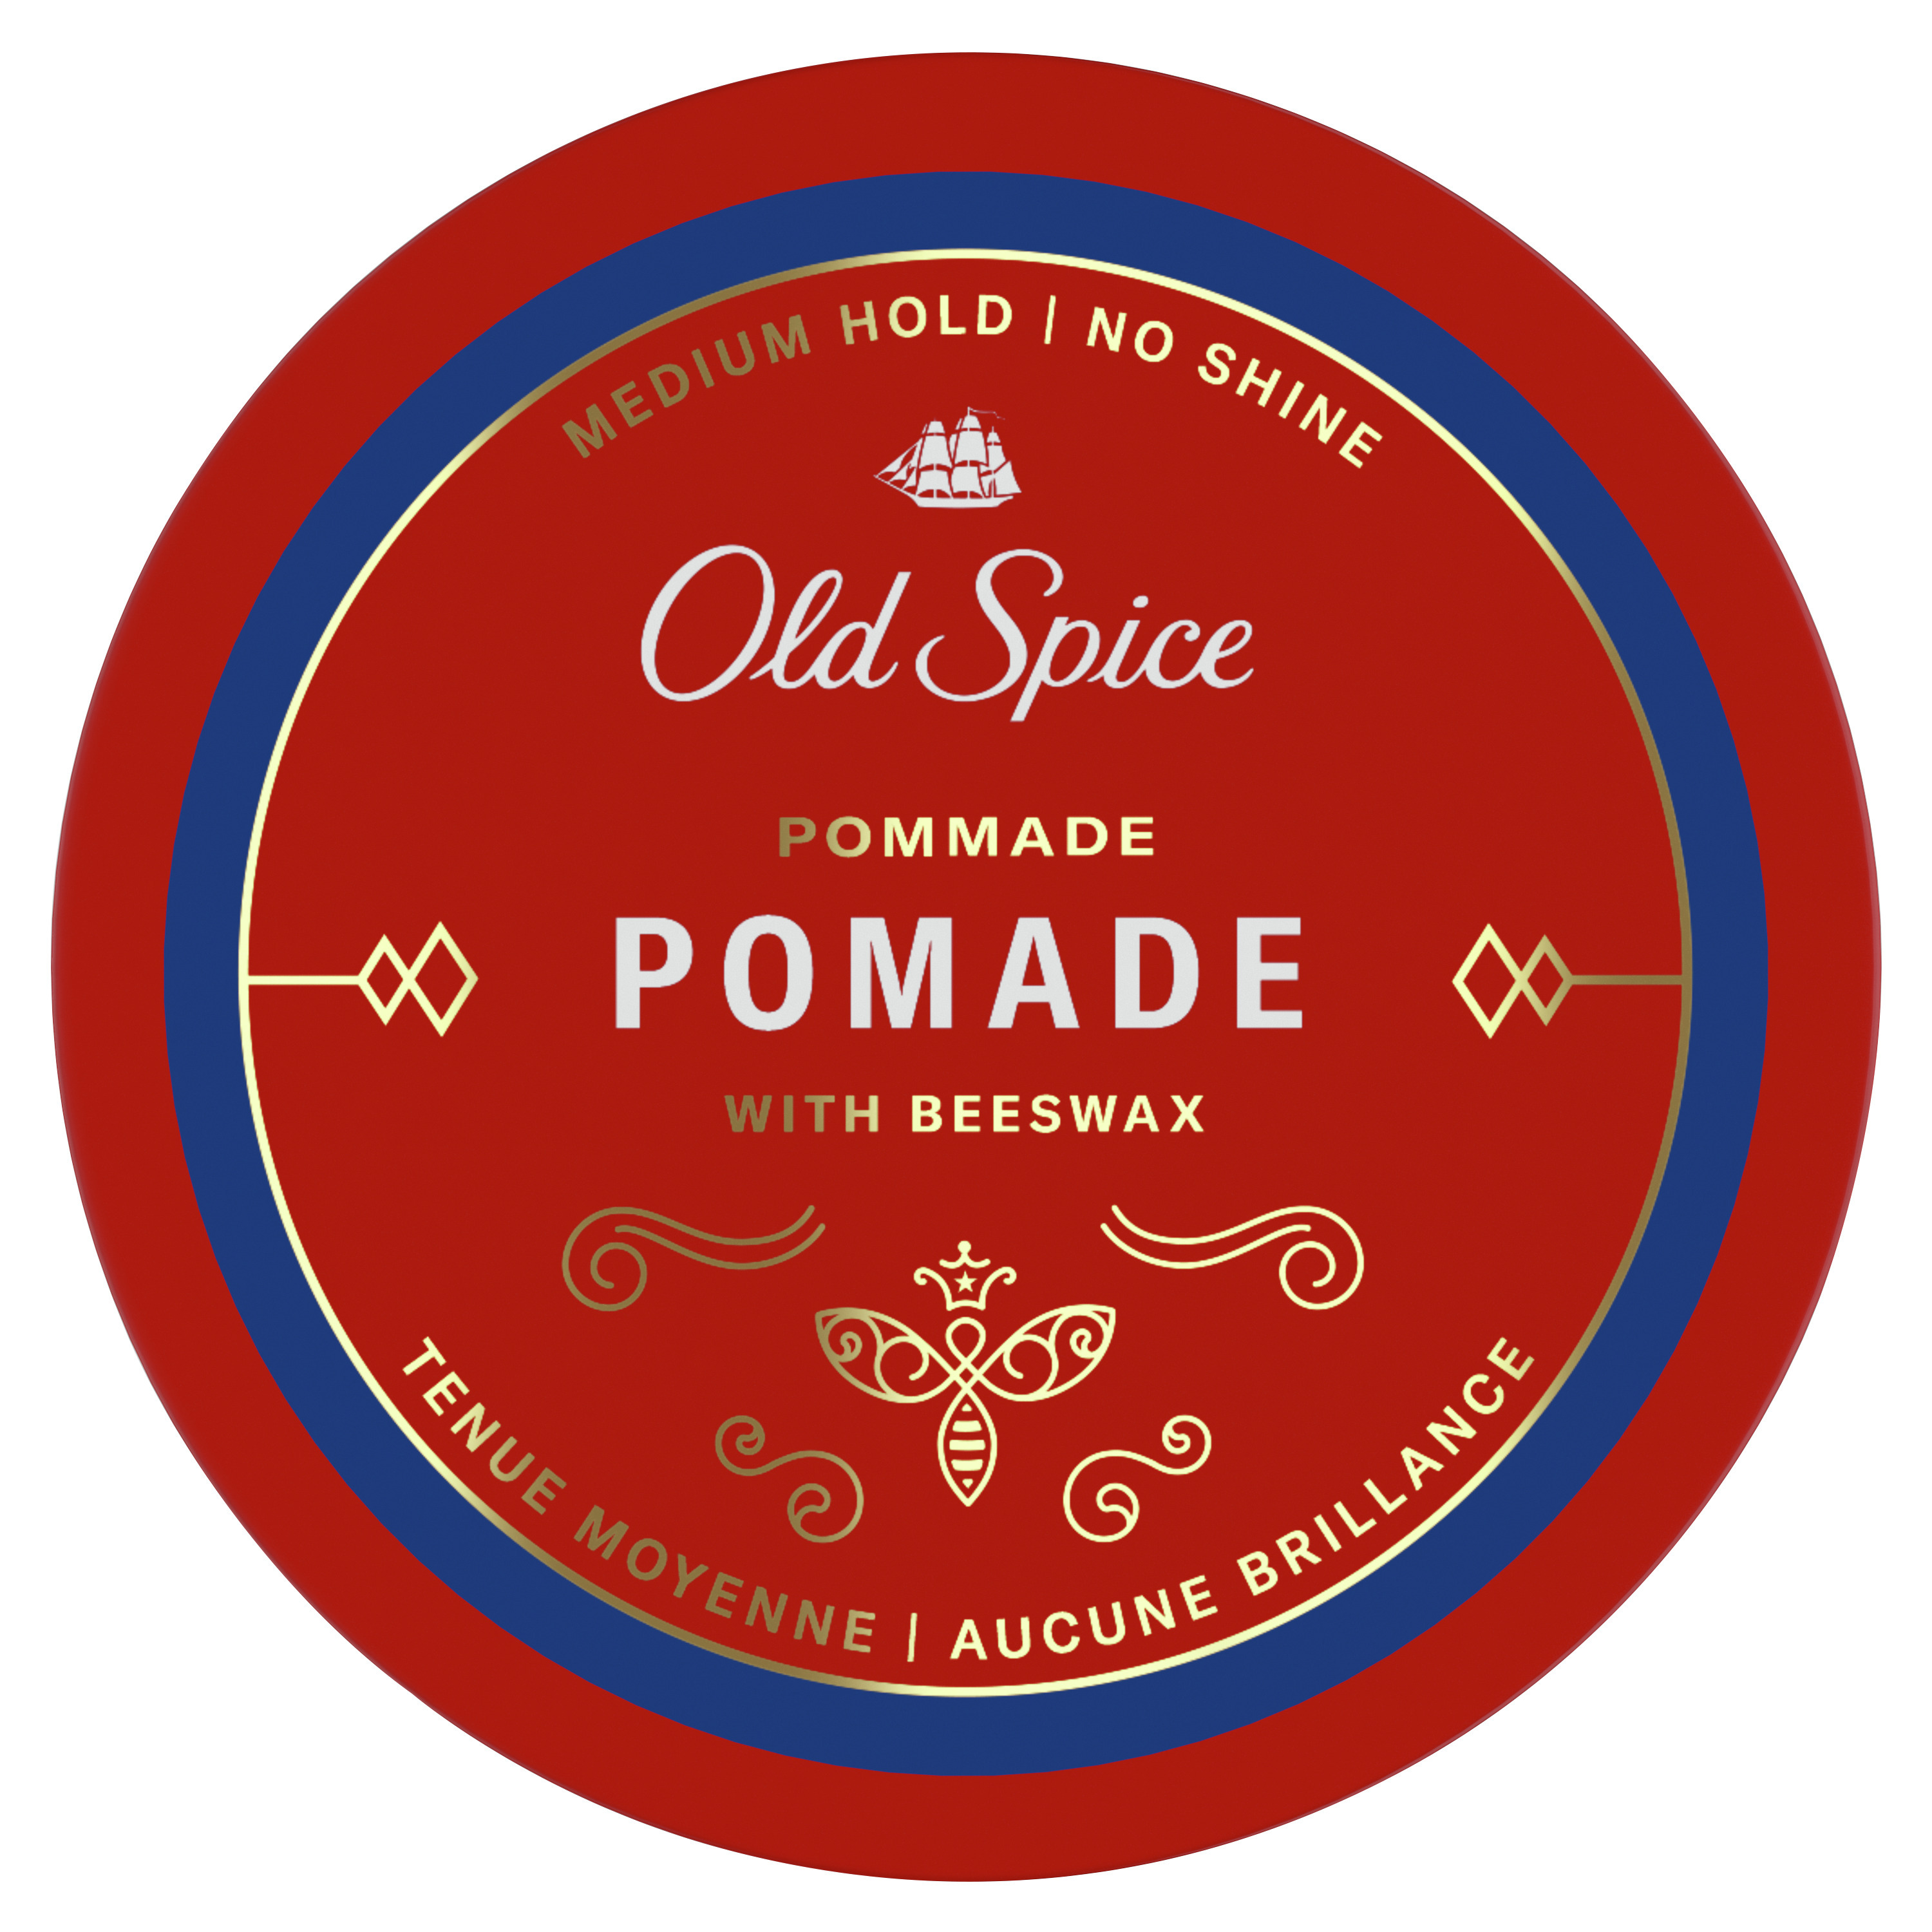 Old Spice Men's Hair Styling Pomade, All Hair Types, Matte Finish, Medium Hold, 2.2 oz - image 1 of 11